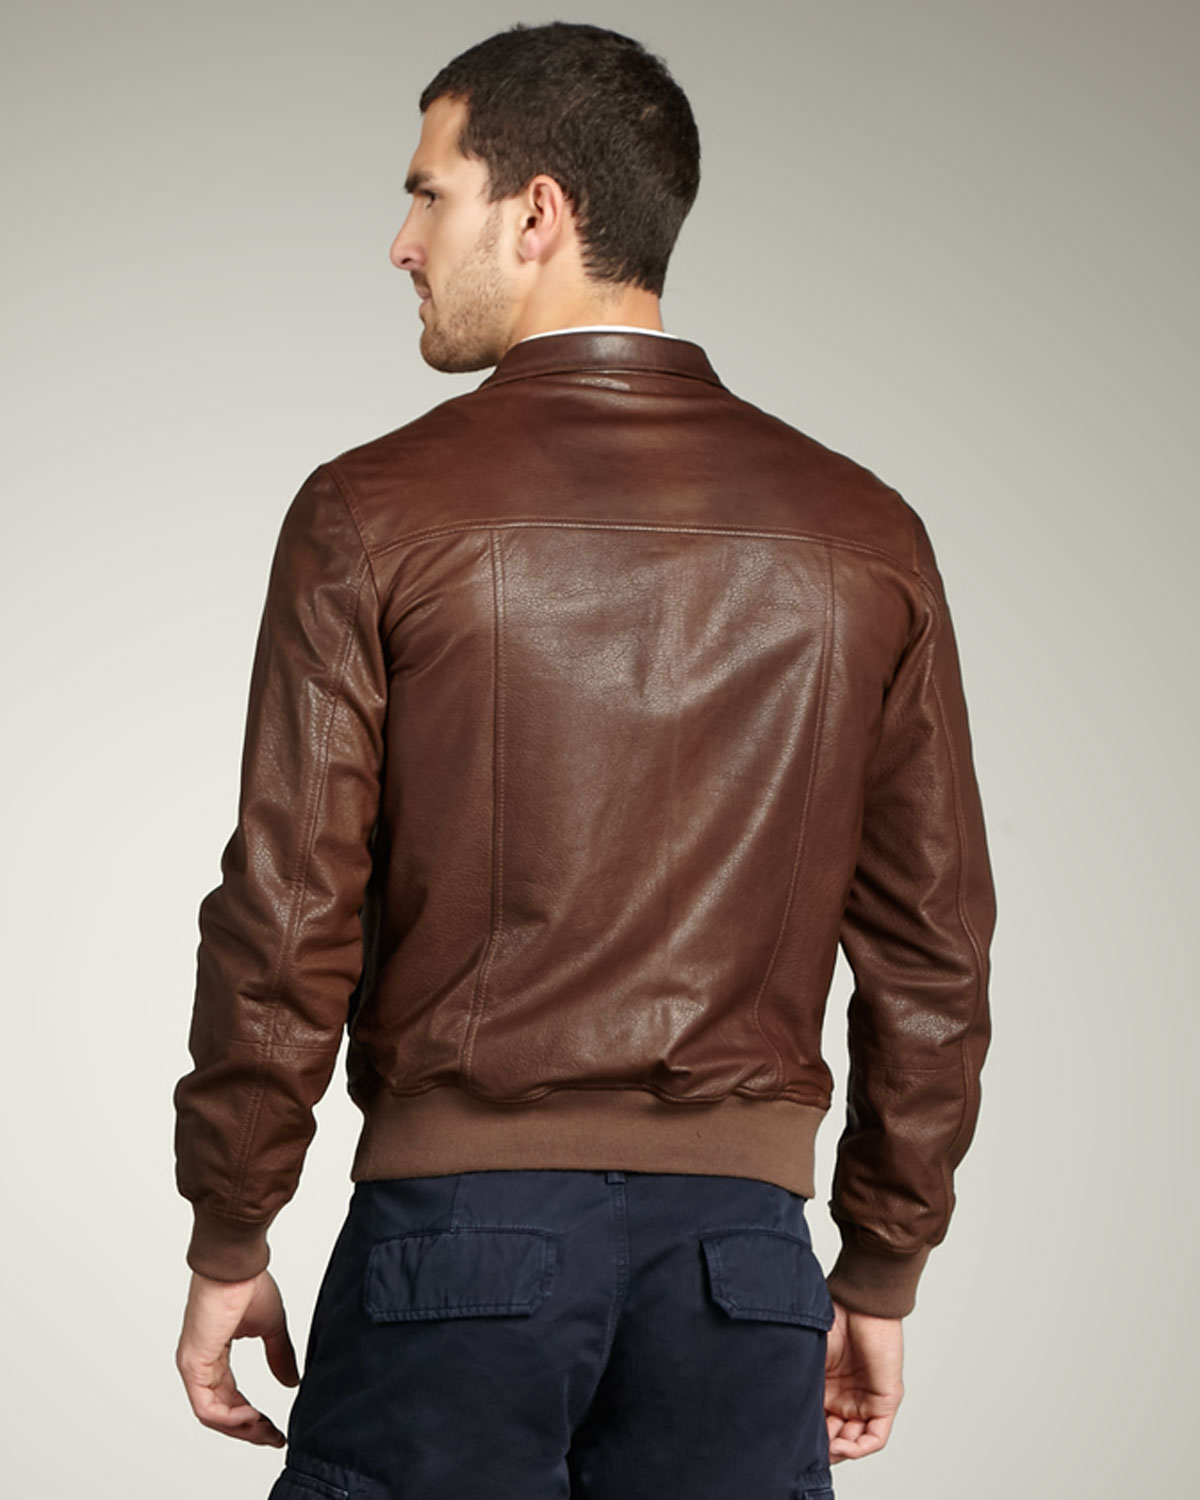 Brunello Cucinelli Leather Bomber Jacket in Brown for Men - Lyst